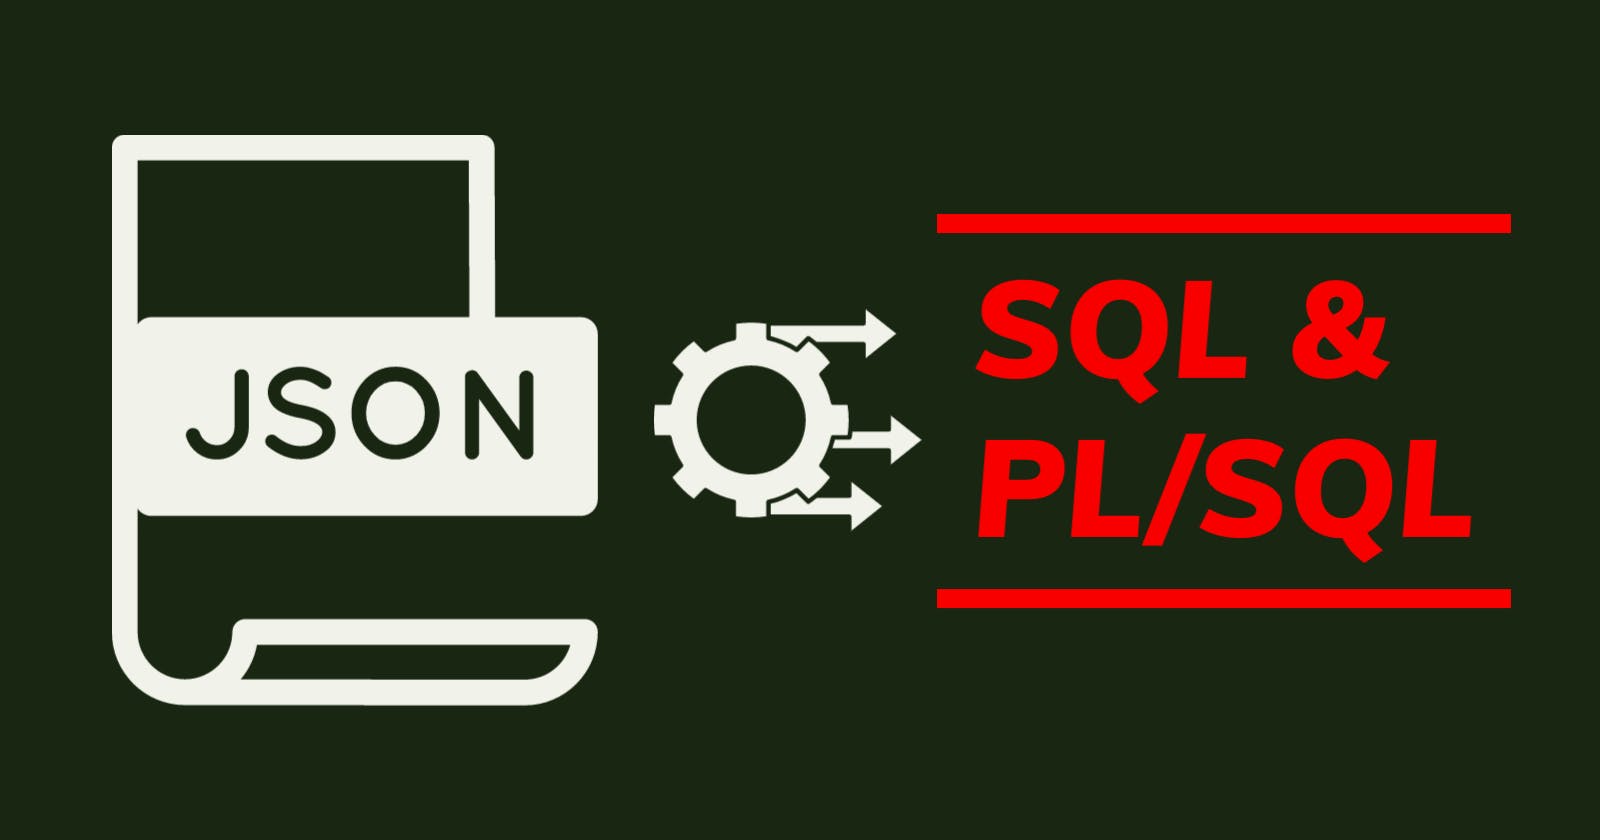 JSON Parsing in Oracle SQL and PL/SQL